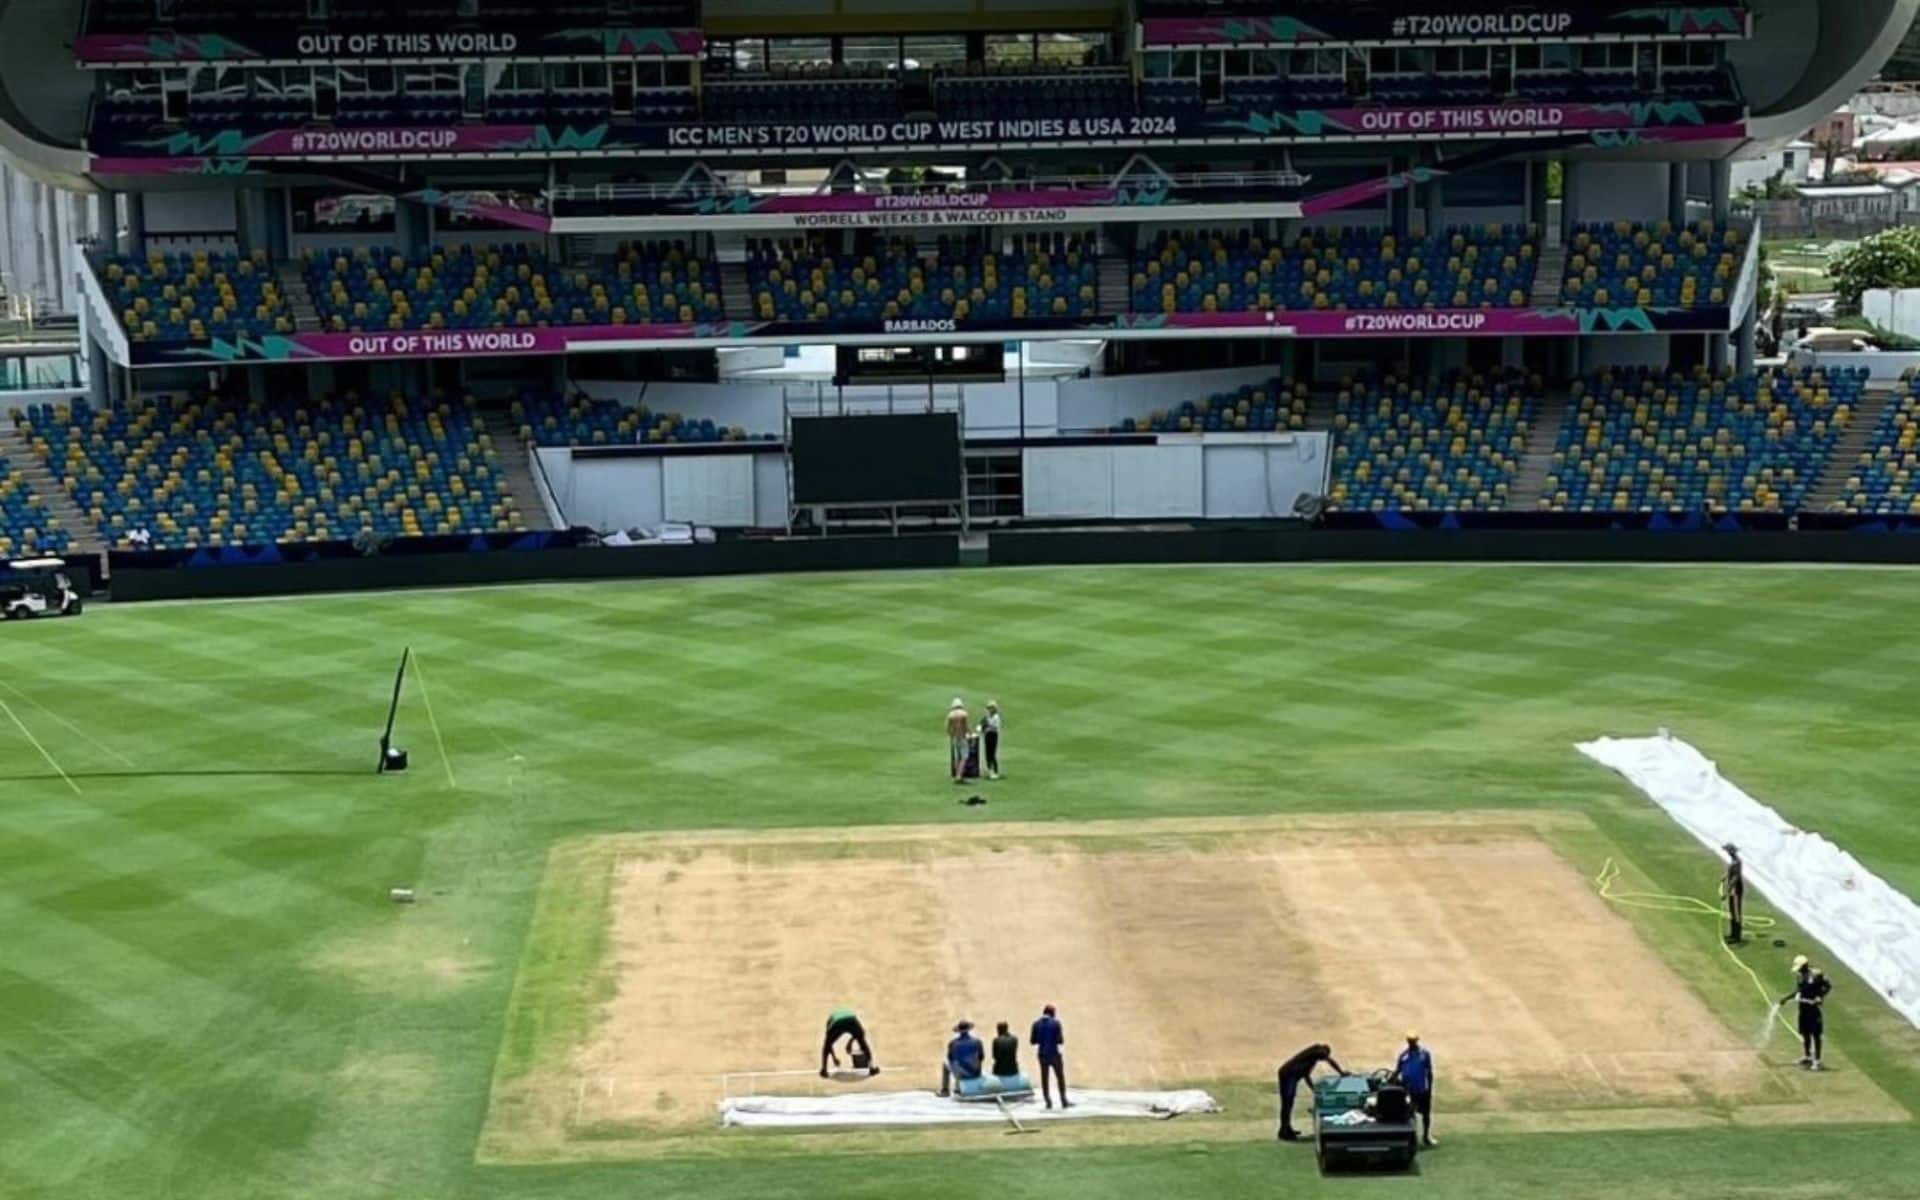 Kensington Oval Barbados Pitch Report For NAM vs SCO T20 World Cup Match